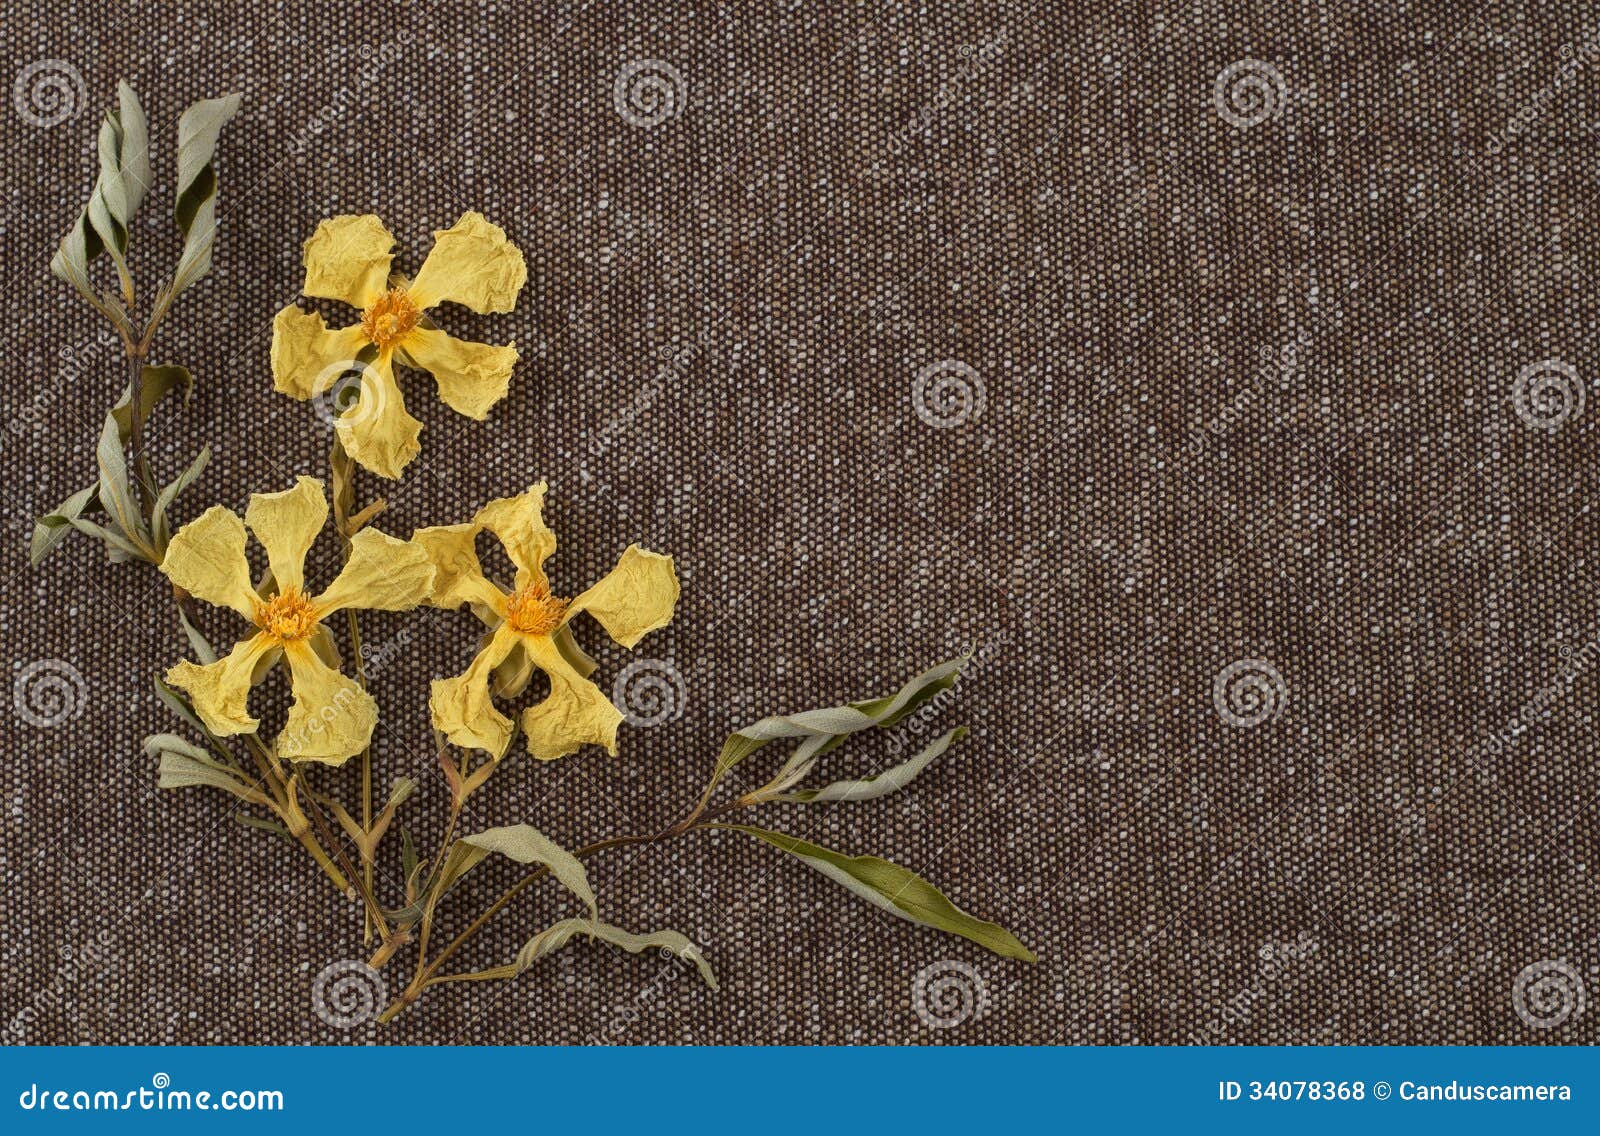 Dried Yellow Flowers on Tweed Fabric with Background Space or Room for Your  Words Stock Photo - Image of arranged, colors: 34078368